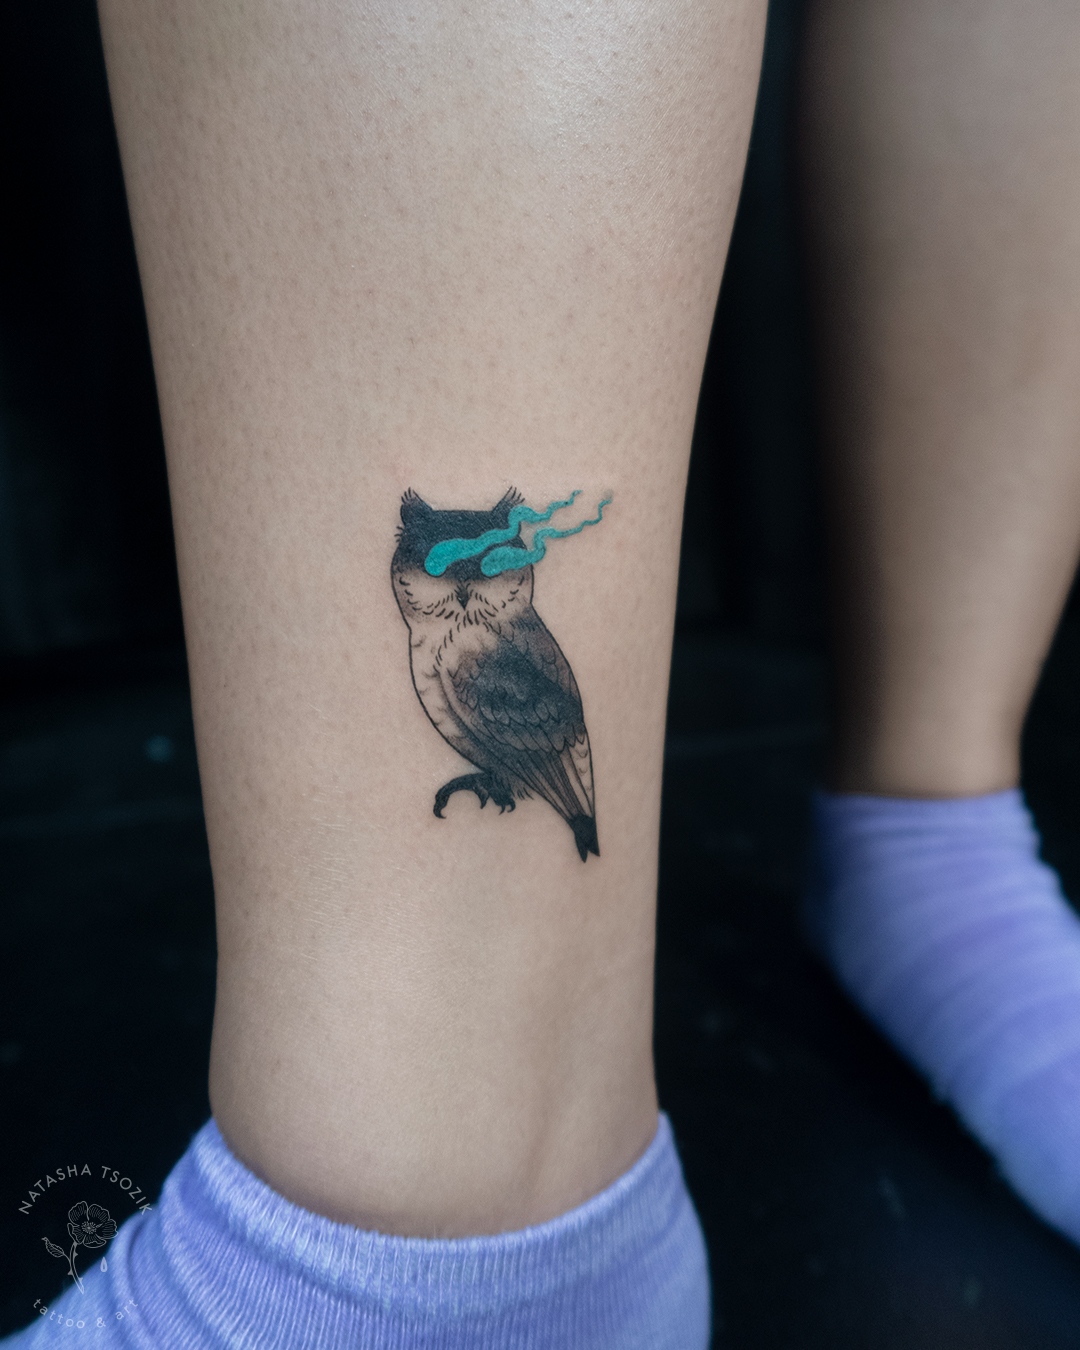 Owl tattoo on an ankle.